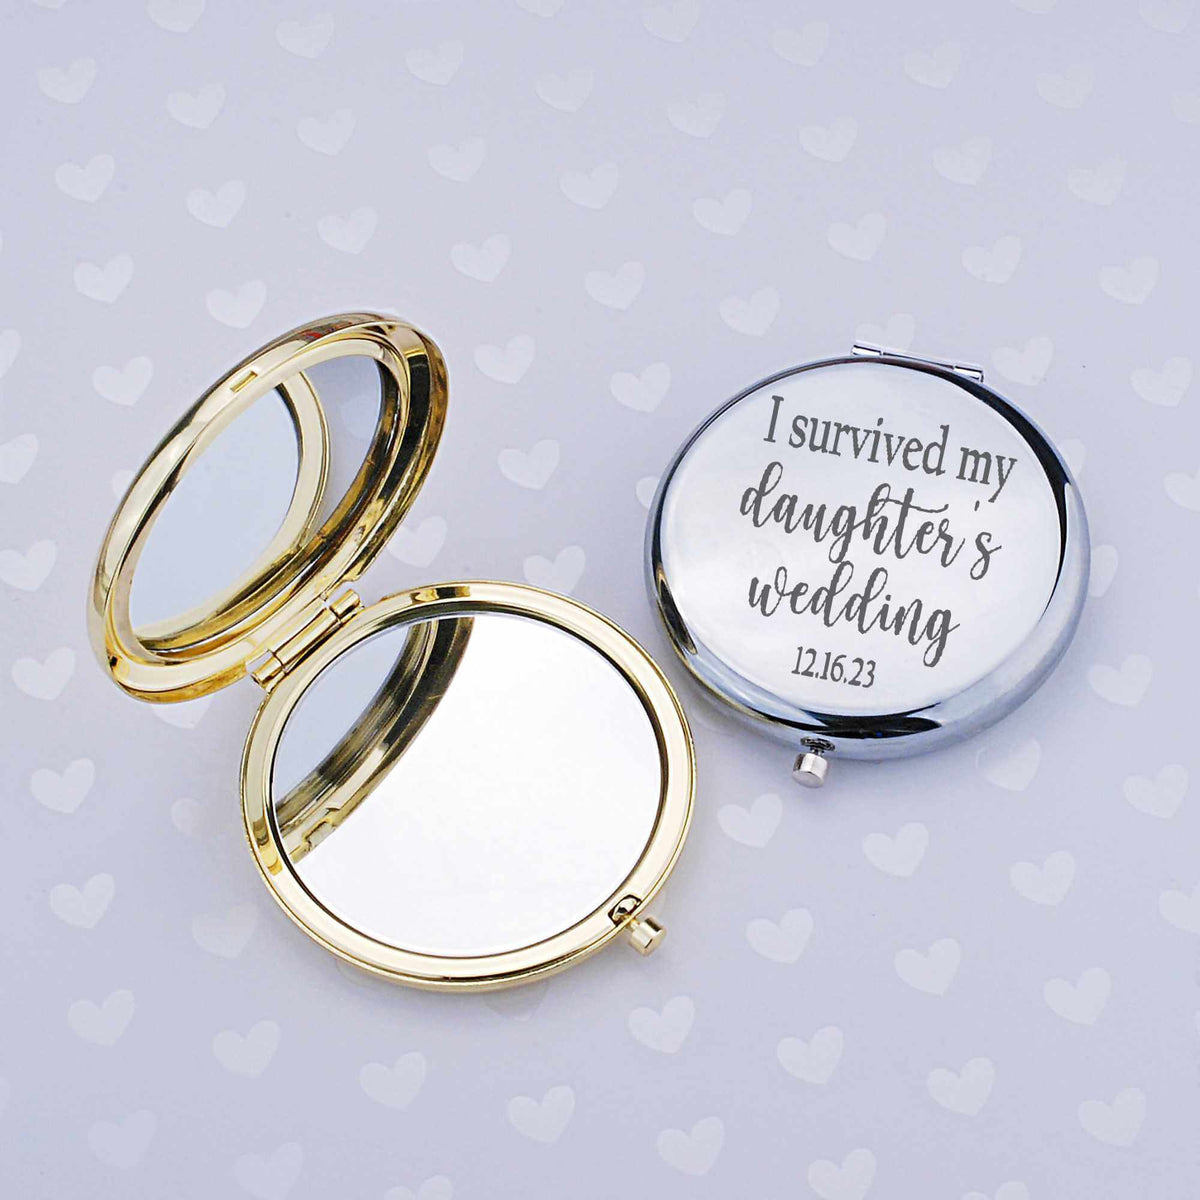 to My Wife Compact Mirror - Birthday Gifts for Wife from Husband, Wife  Gifts for